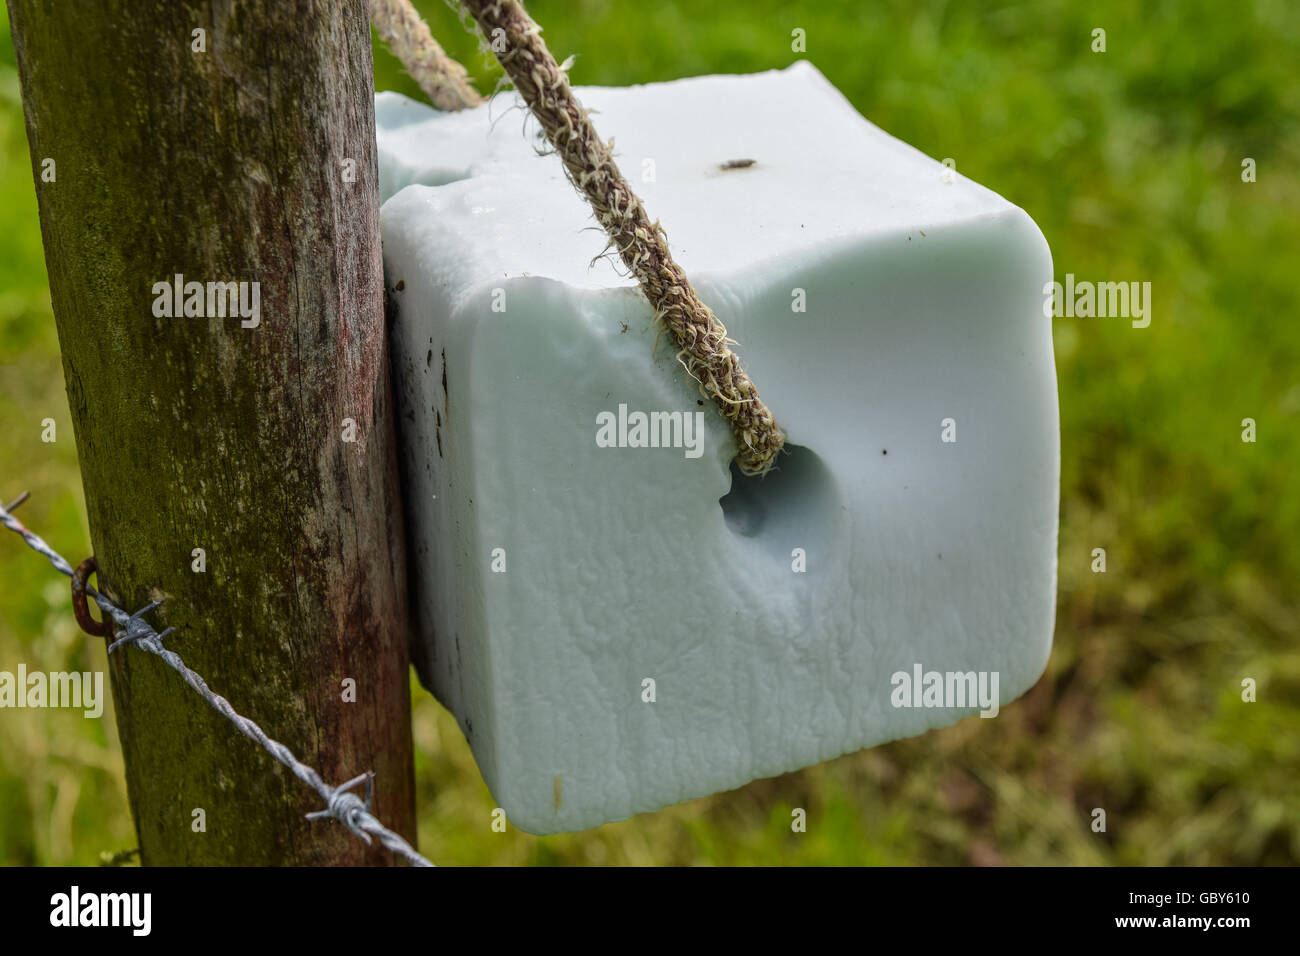 Salt lick stone tied on a fence for providing livestock with sodium chloride and extra minerals Stock Photo